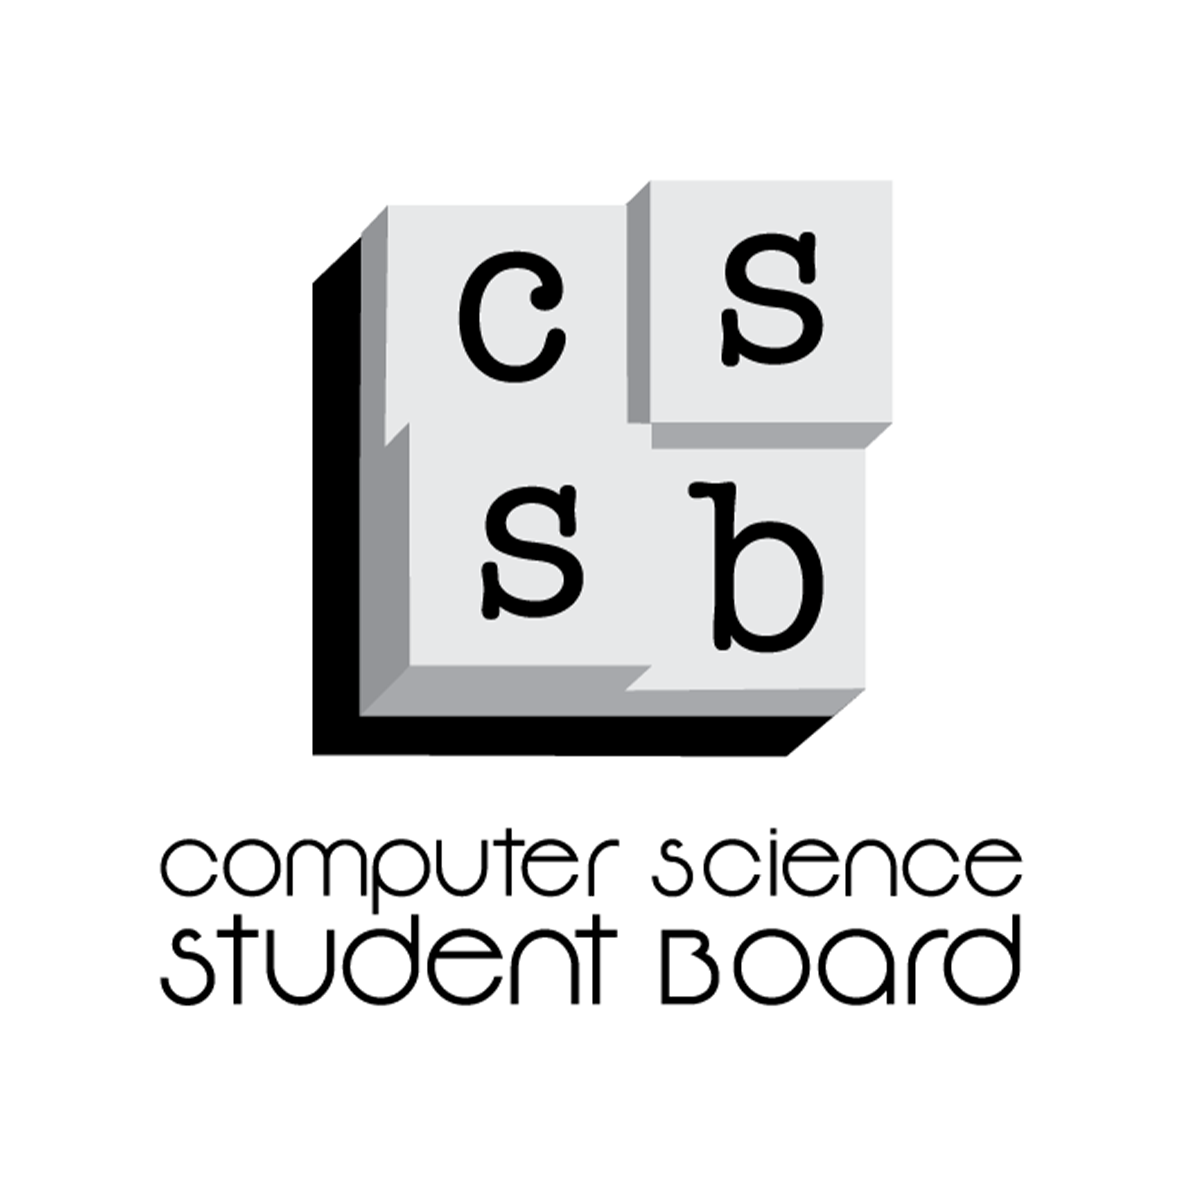 Computer Science Student Board (CSSB)